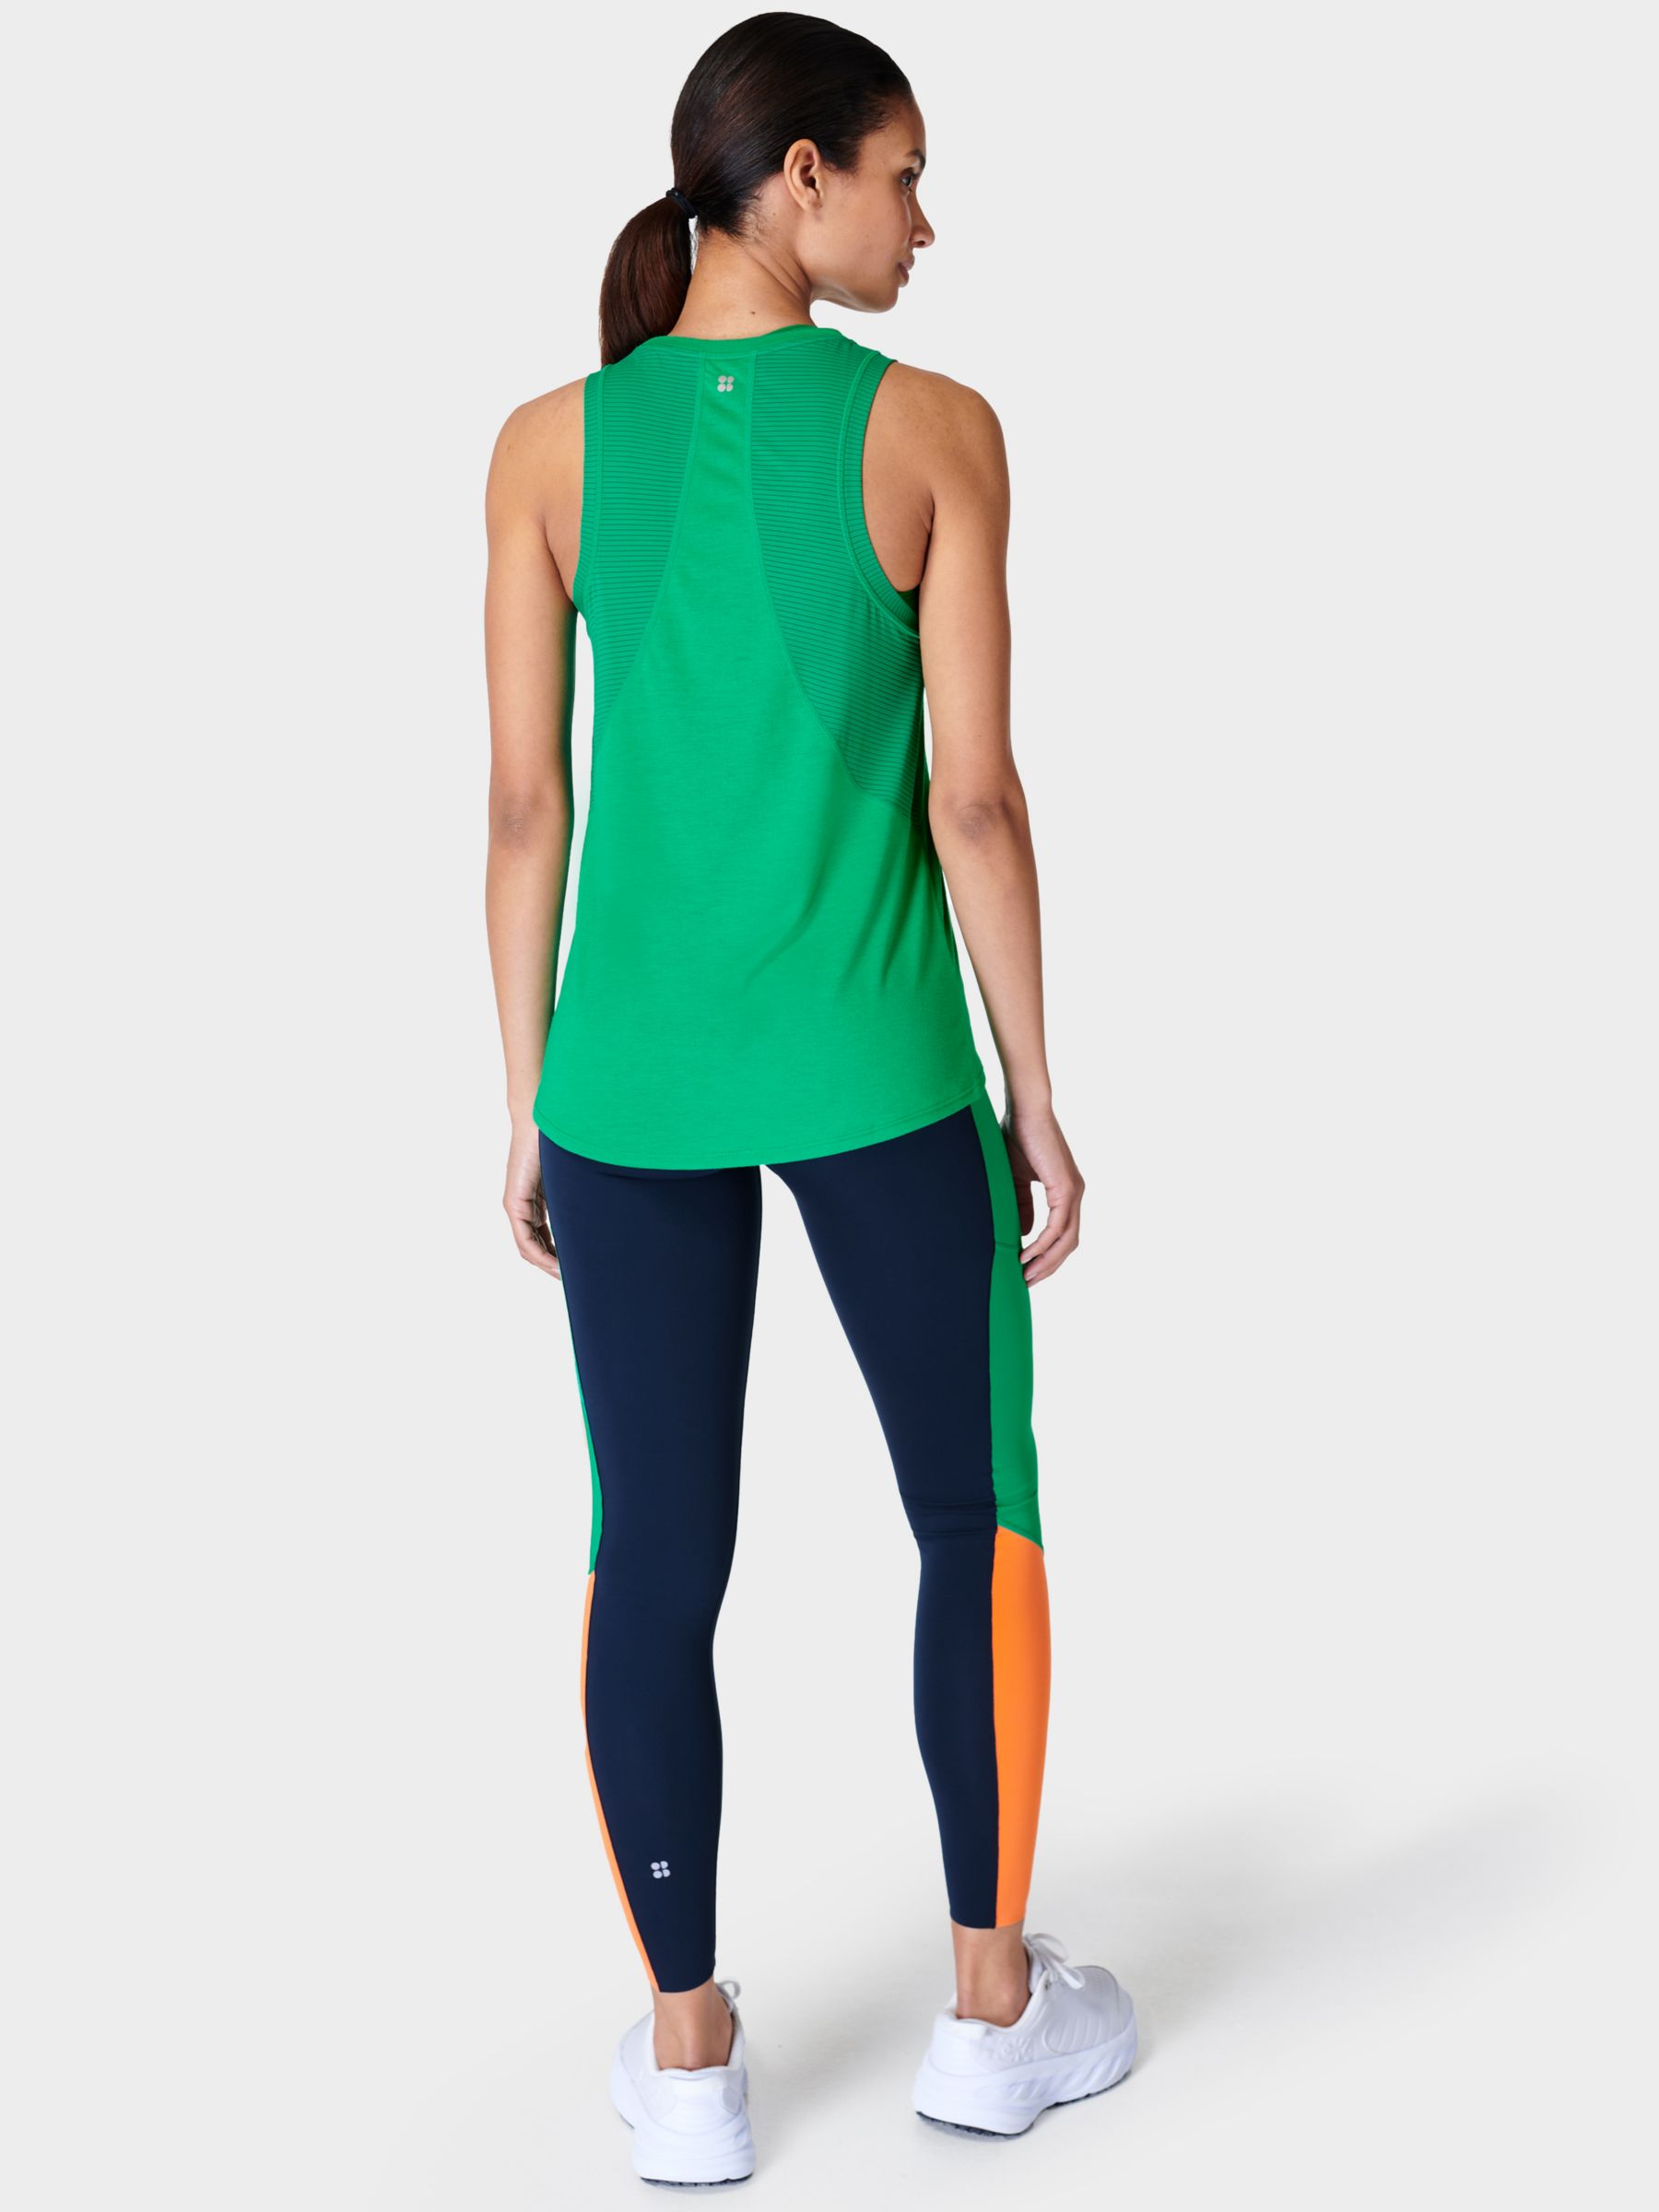 Sweaty Betty - Are you an AM or PM runner? Stay safe and seen with